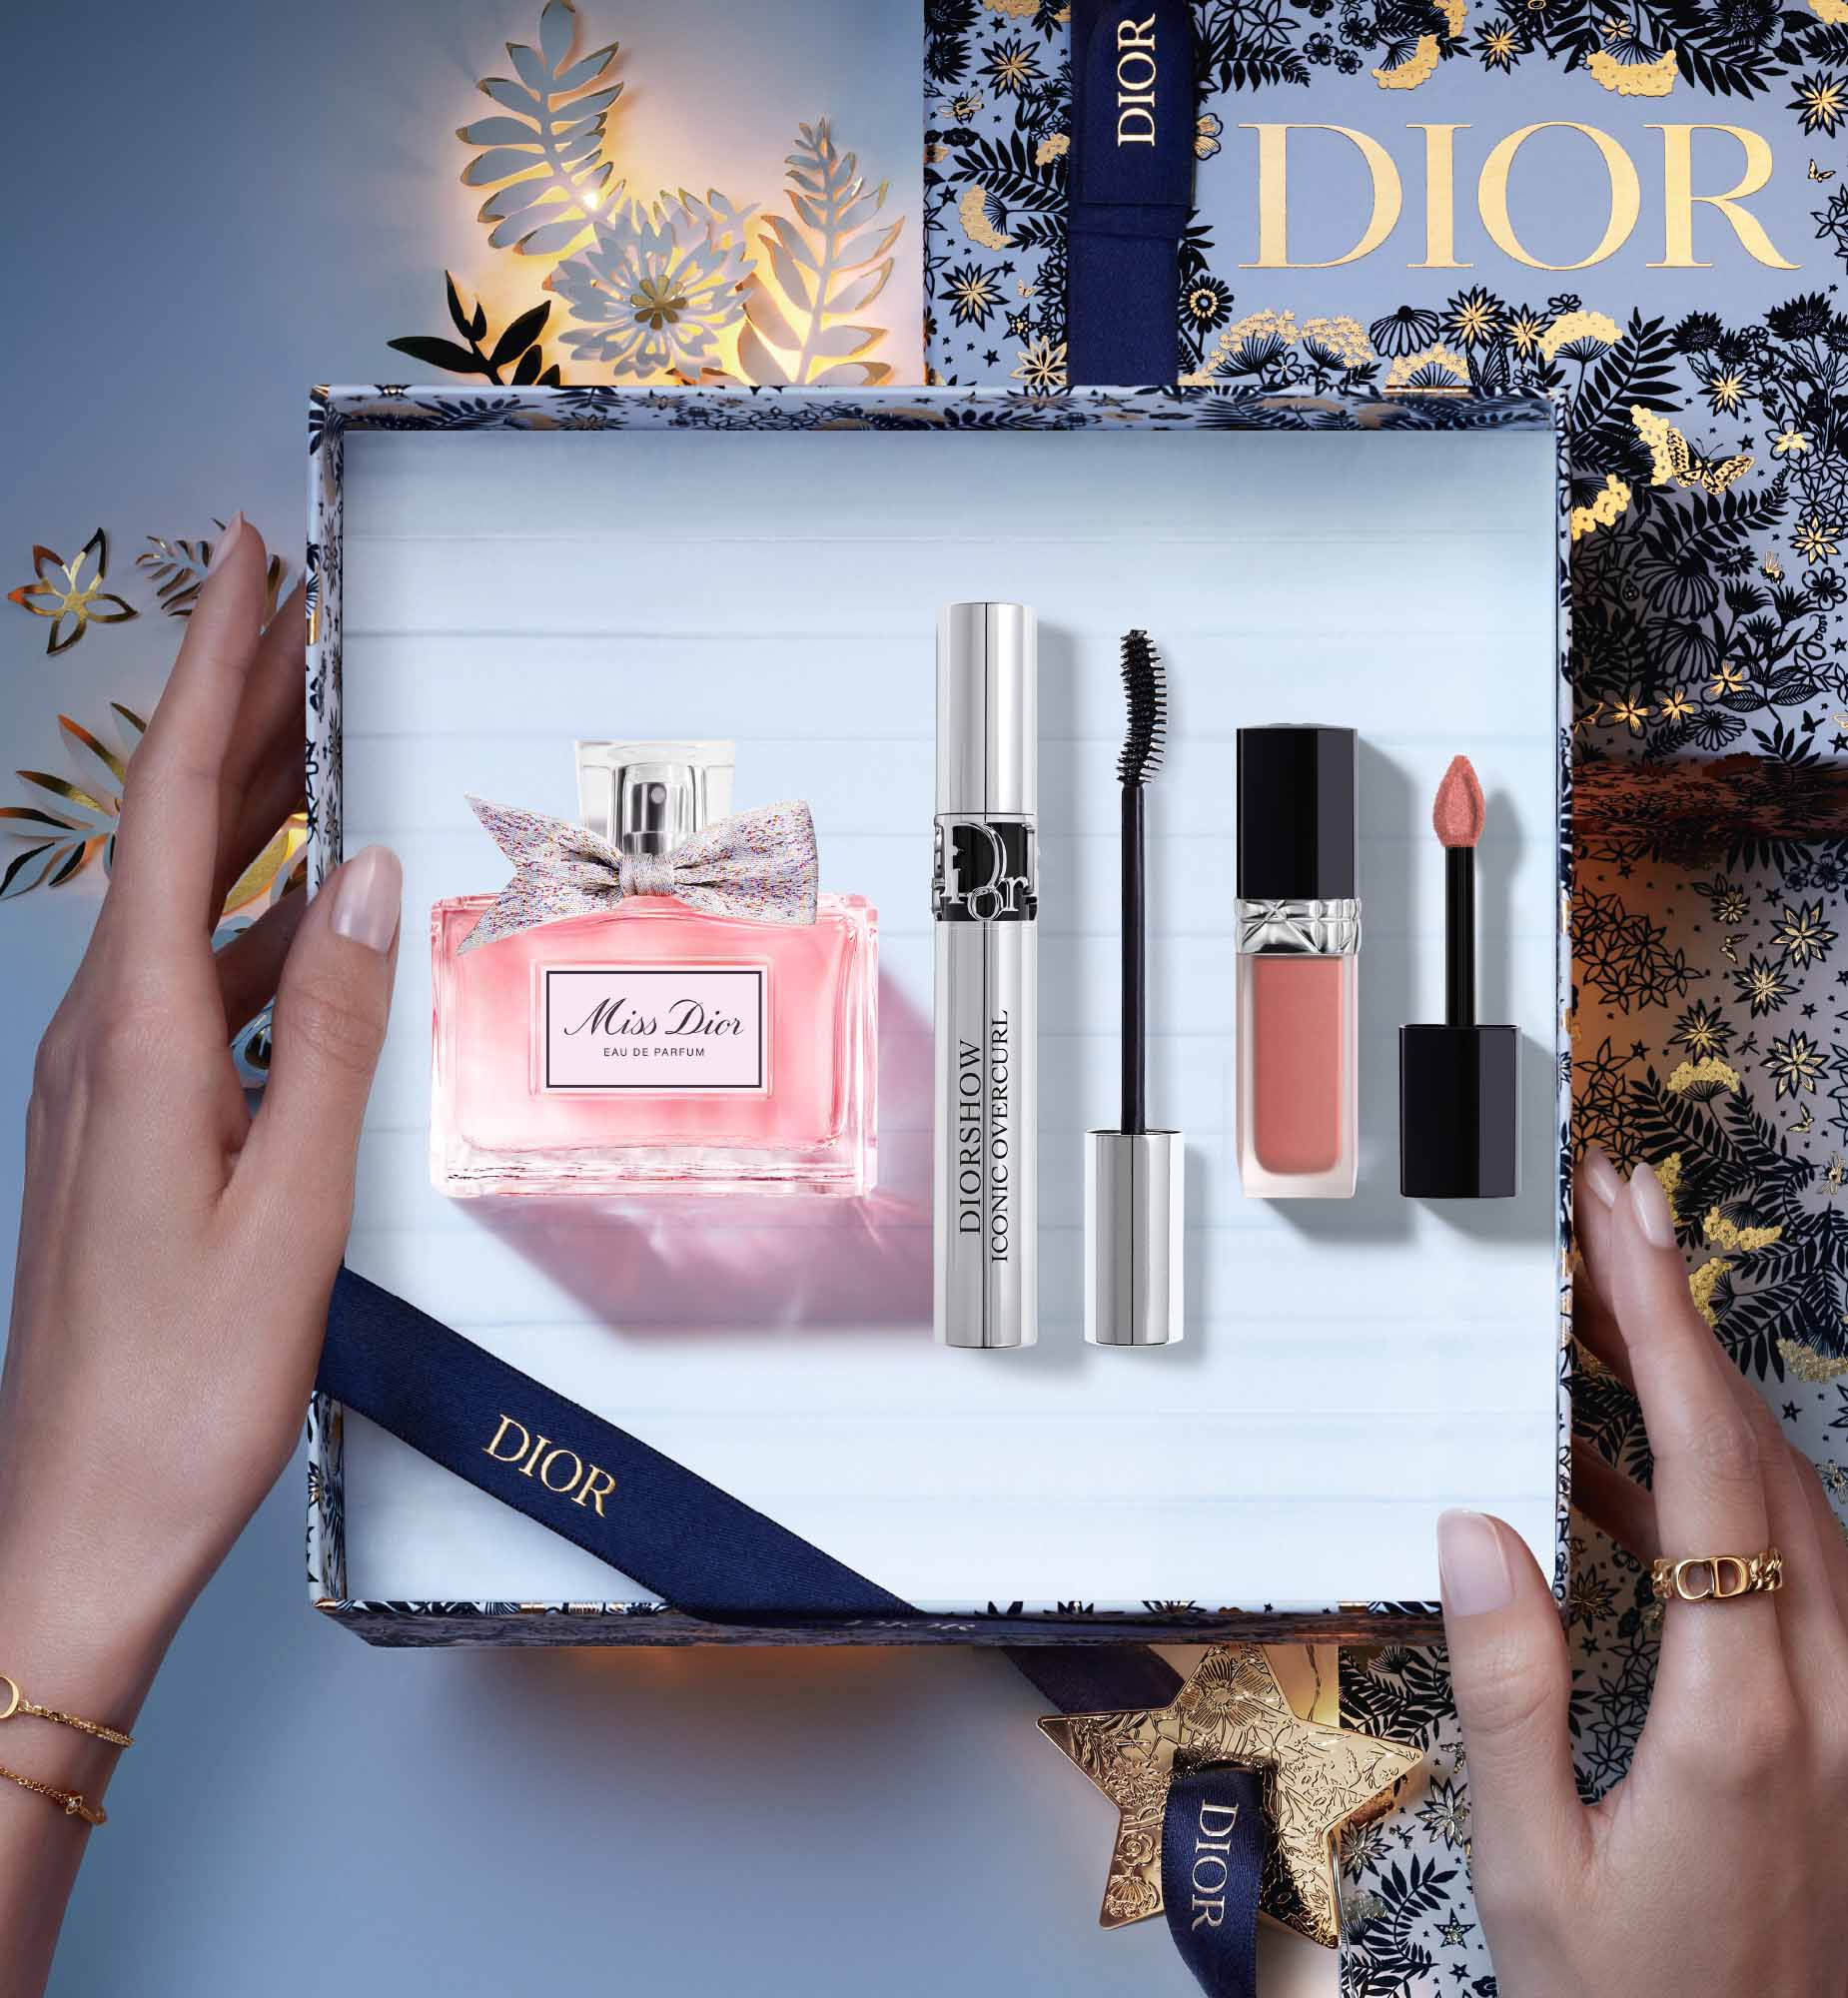 The Gift of Love - products | DIOR